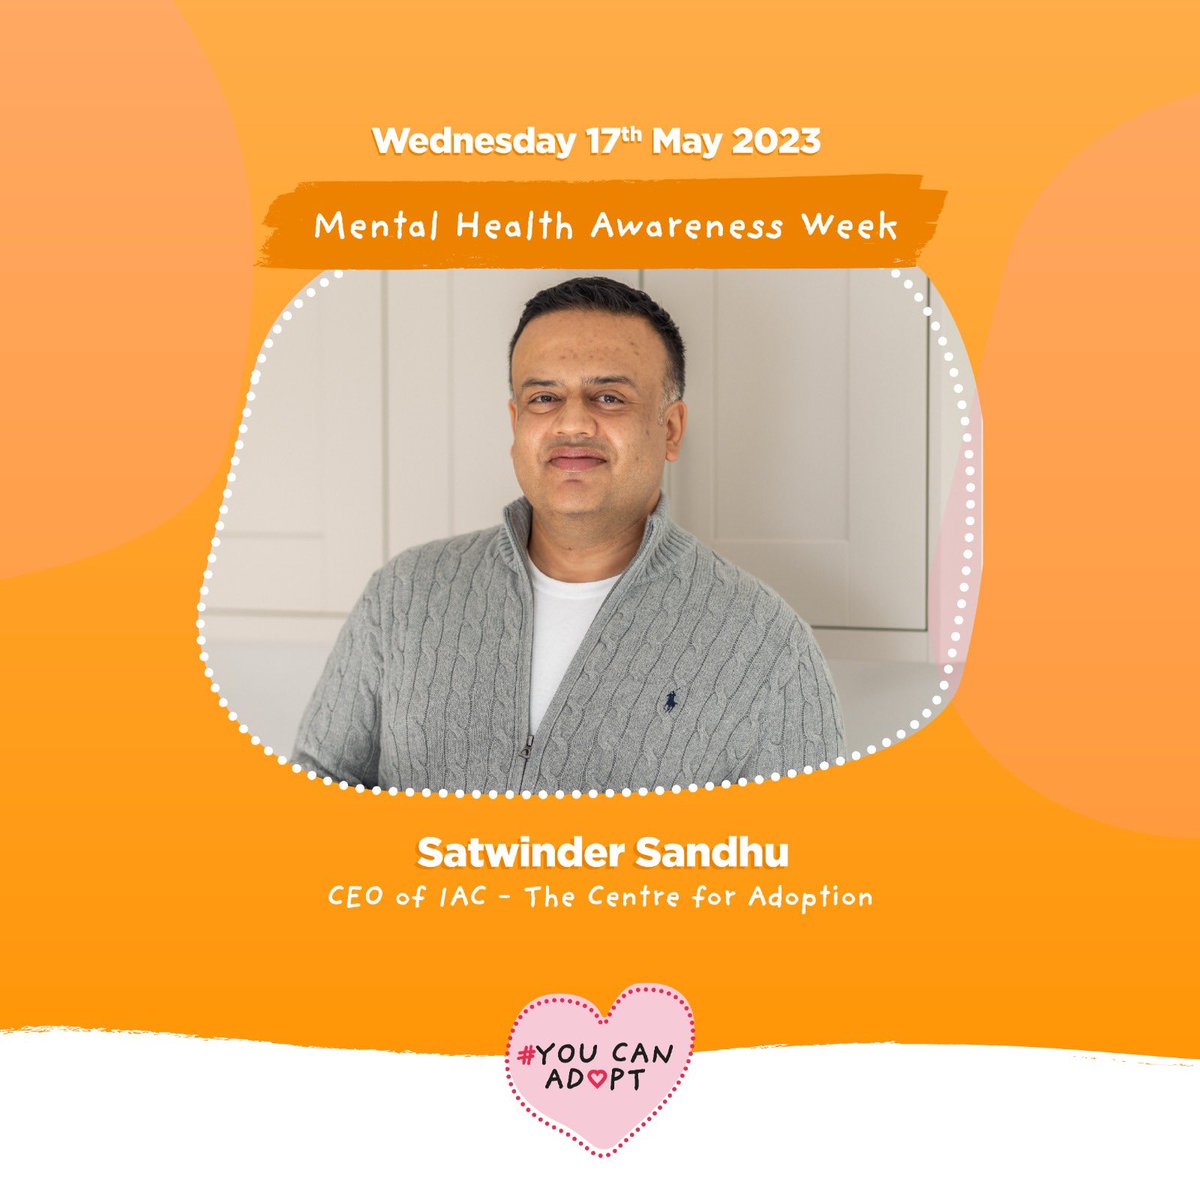 It is #mentalhealthawarenessweek2023 and on Wednesday I will be doing an #instagram takeover for @Youcanadopt for a Q&A during the day so please check it out and submit your questions on any issues linked to #adoption #MentalHealthAwarenessWeek